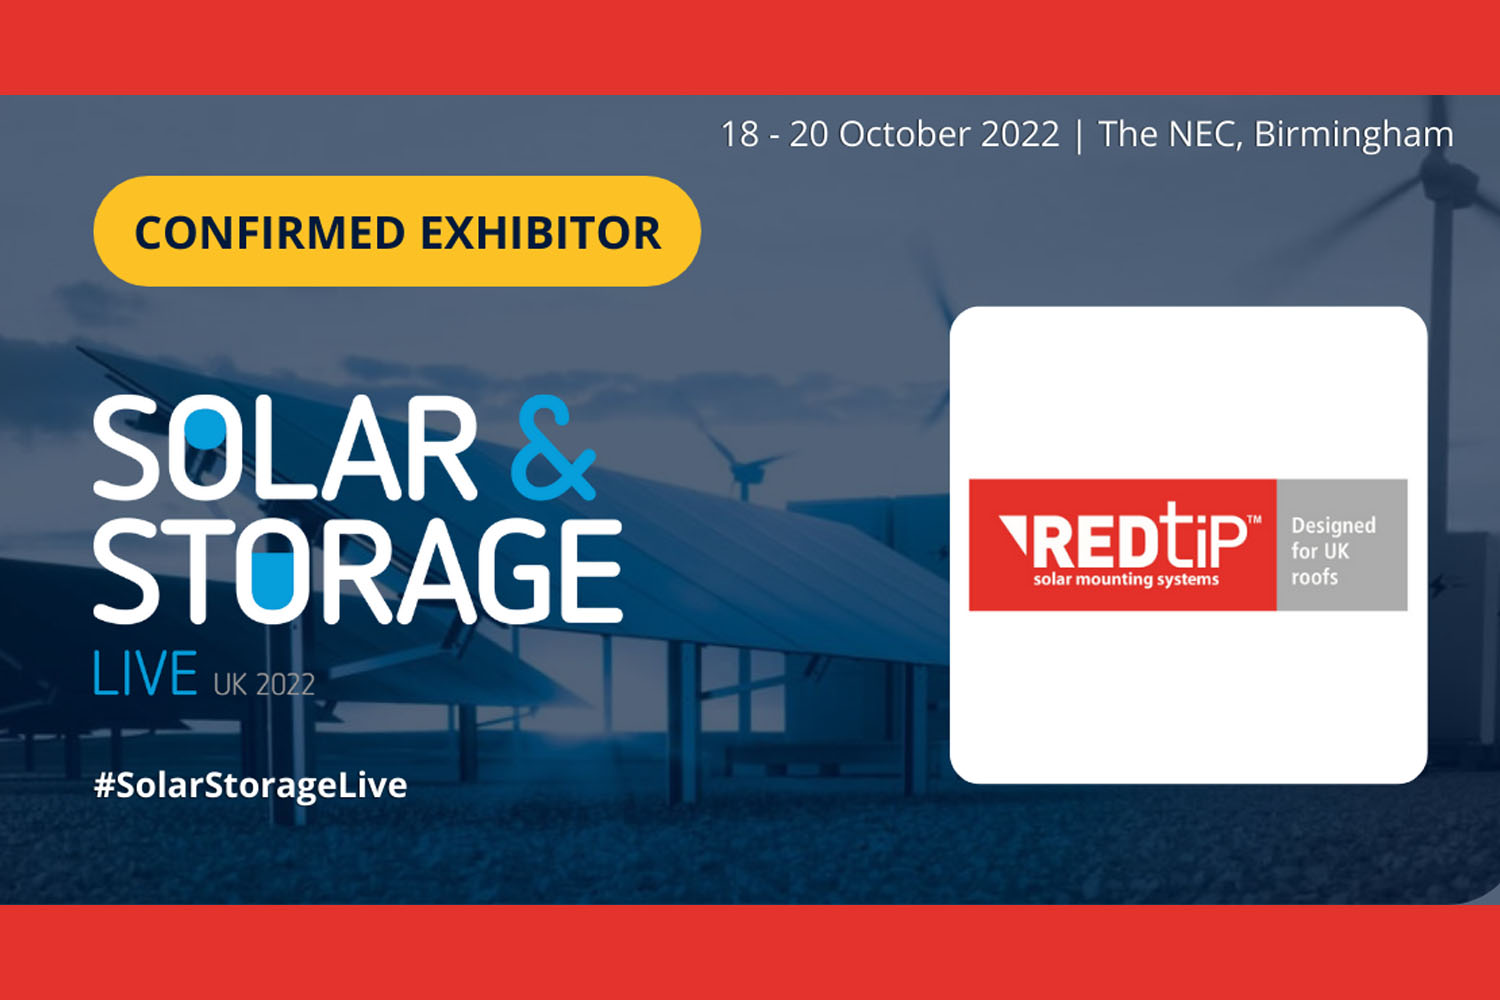 REDtip™ to Exhibit at Solar and Storage Live 2022